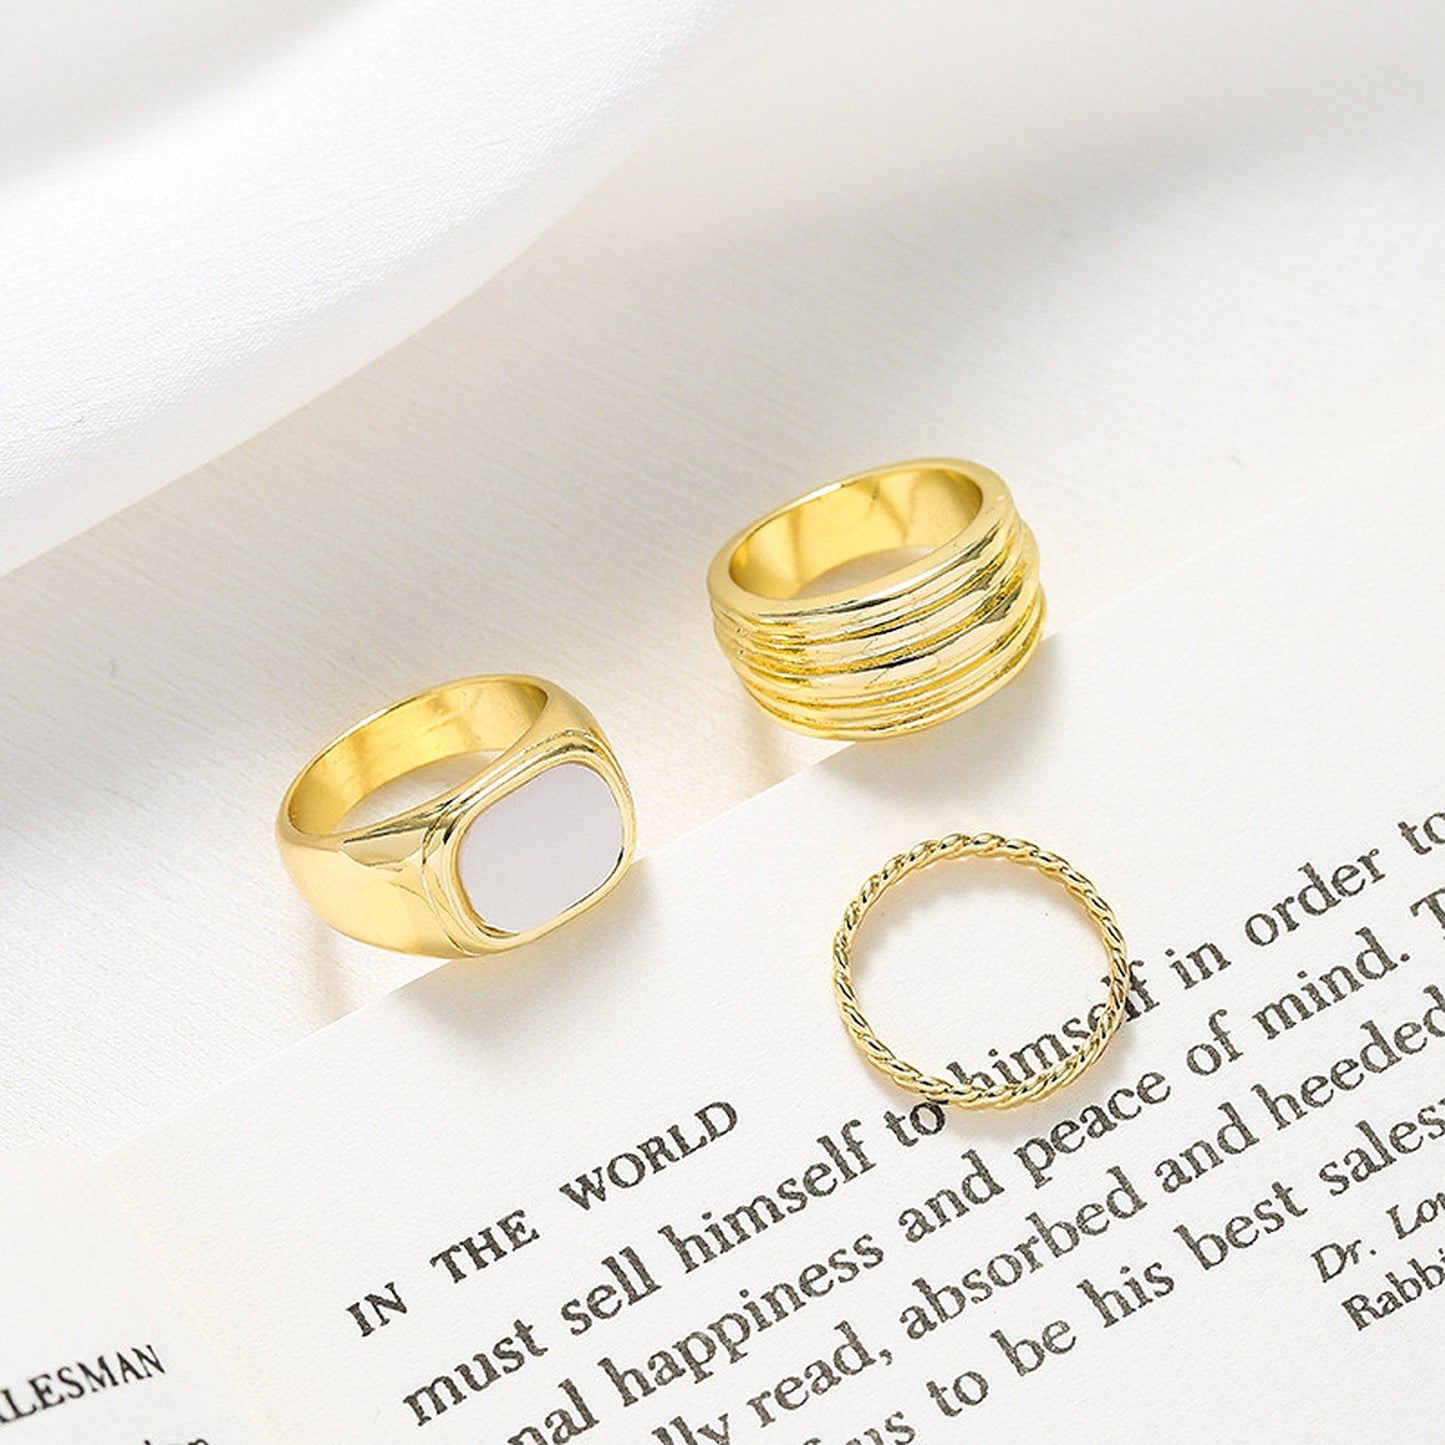 K-pop Chunky Rings, Black and White Ring Set, Gold Vine Twisted Ring, Punk Ring Set, Wide Band Ring, Signet Ring, Statement Cocktail Ring